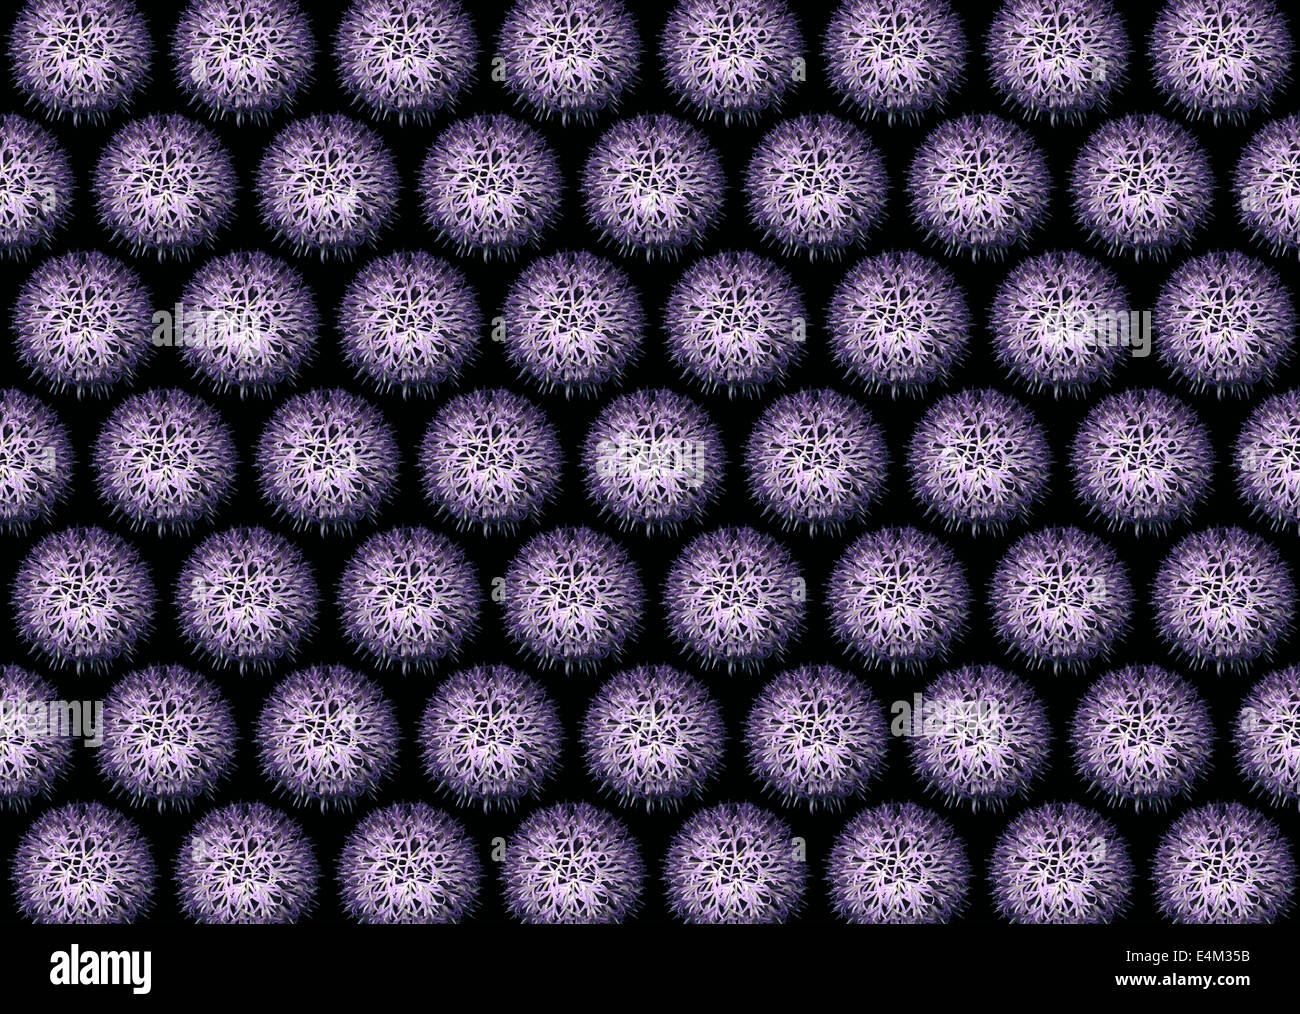 Repeating design pattern based on the head of an echinops flower against a black background Stock Photo